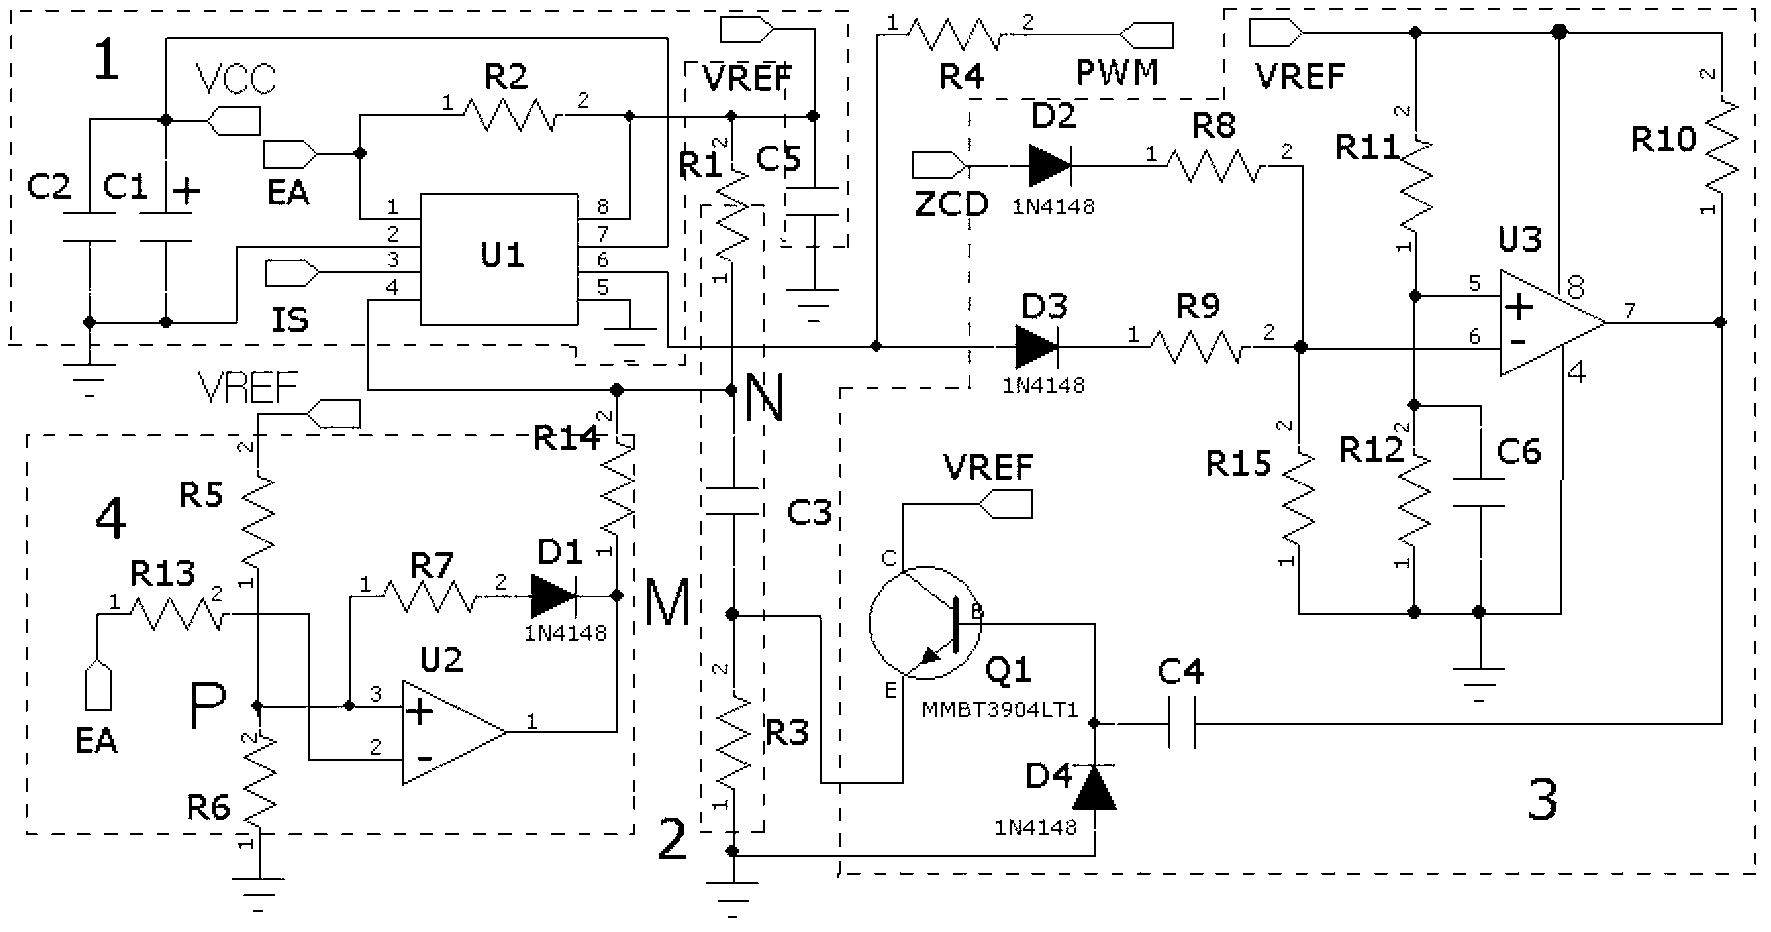 PWM (pulse-width modulation) module capable of alternatively generating interruption mode and critical mode in flyback topology